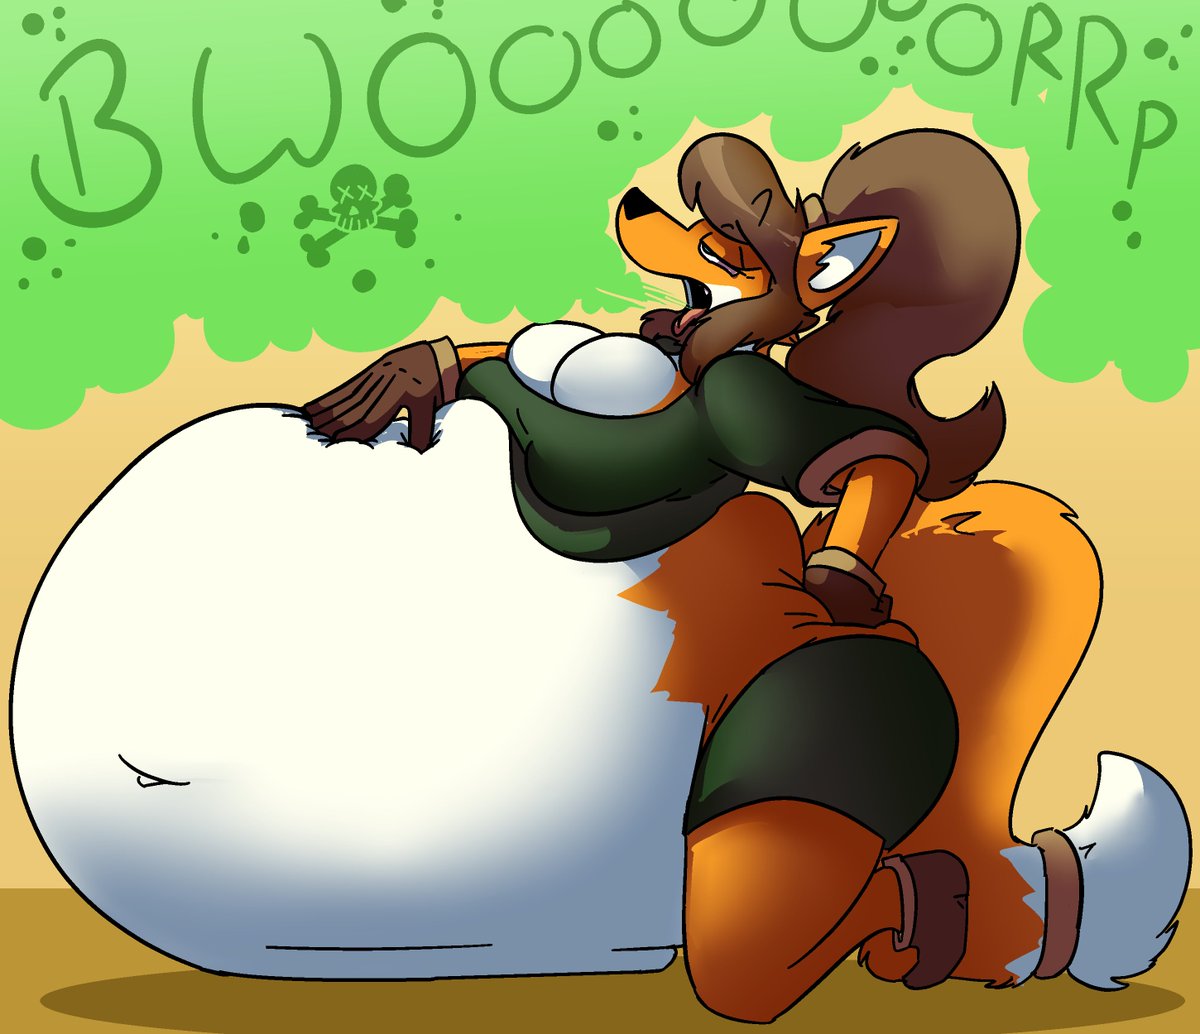 Beware of foxy alchemists producing belly pollution!